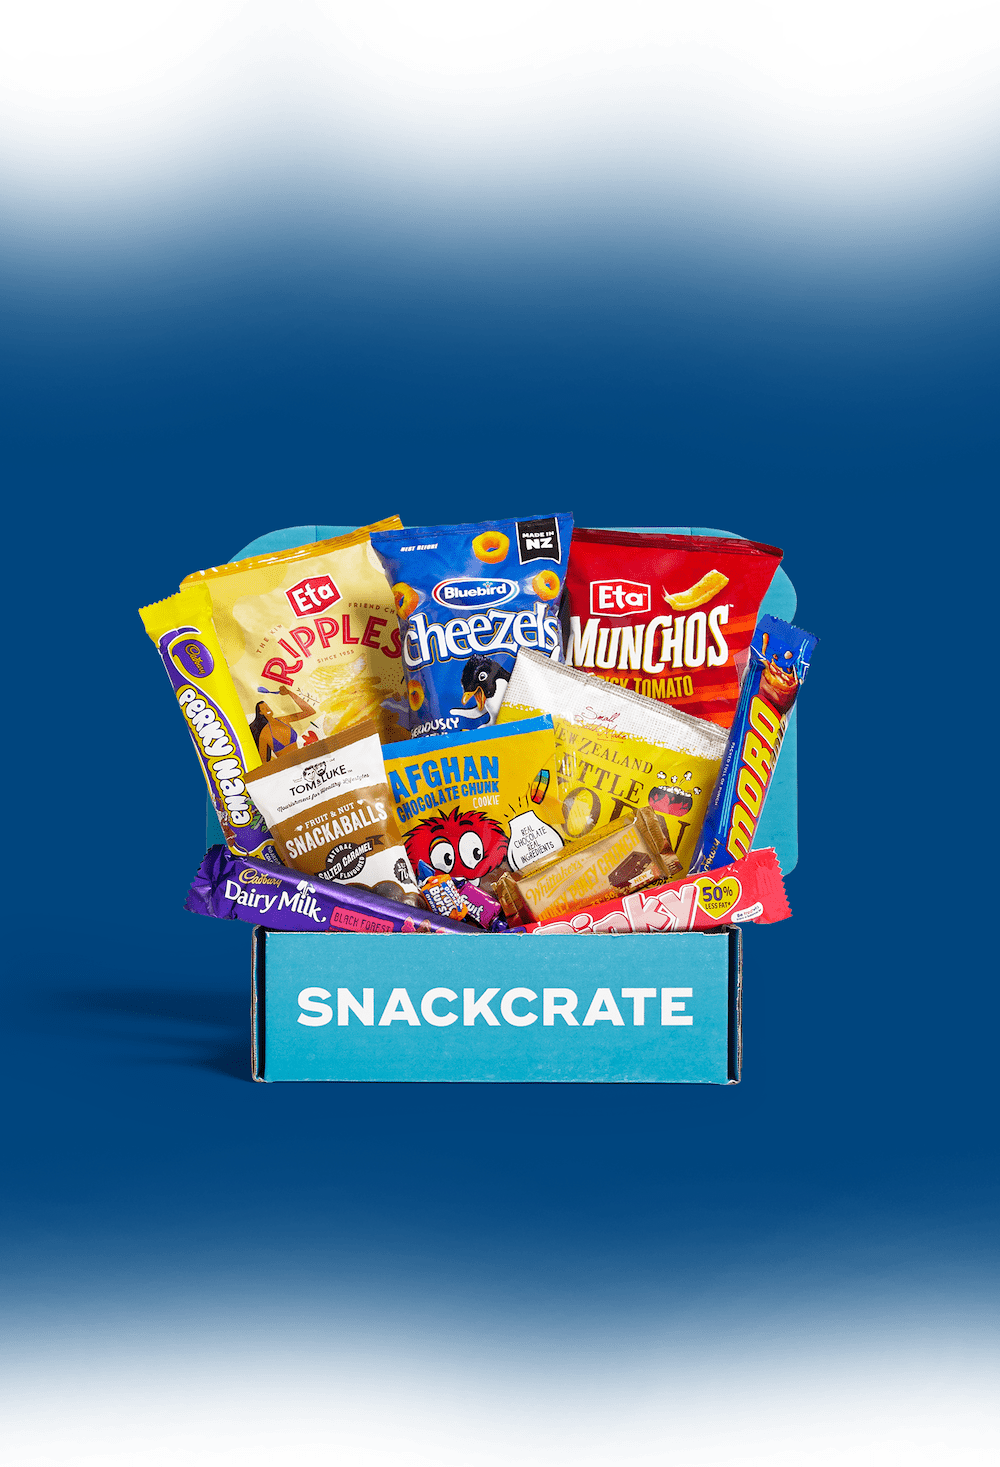 New Zealand snackcrate full of foreign snacks